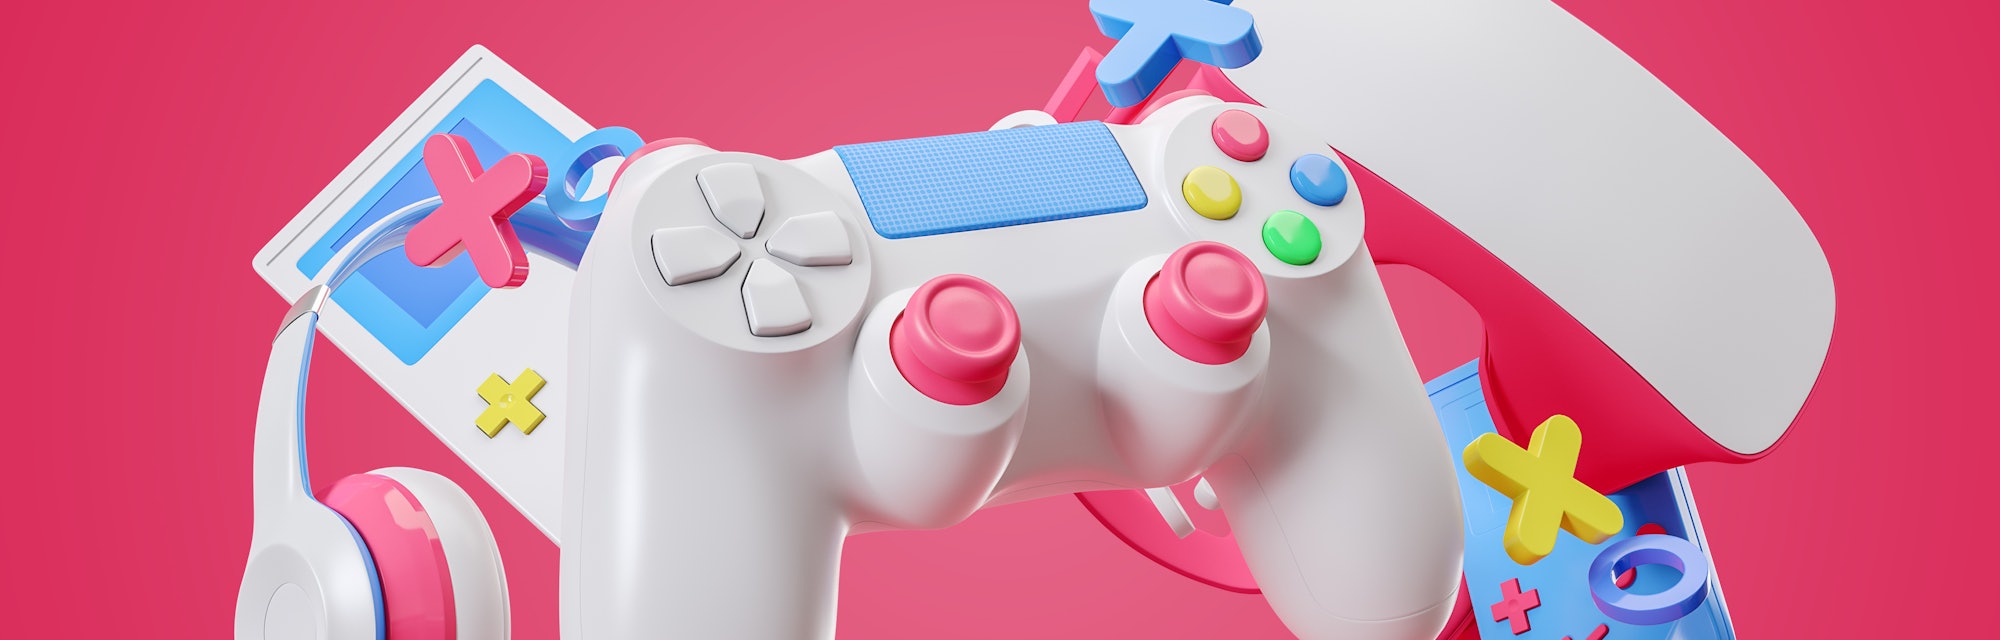 Colorful gamepad, headphones and game console hanging isolated on a pink background. Gaming concept....